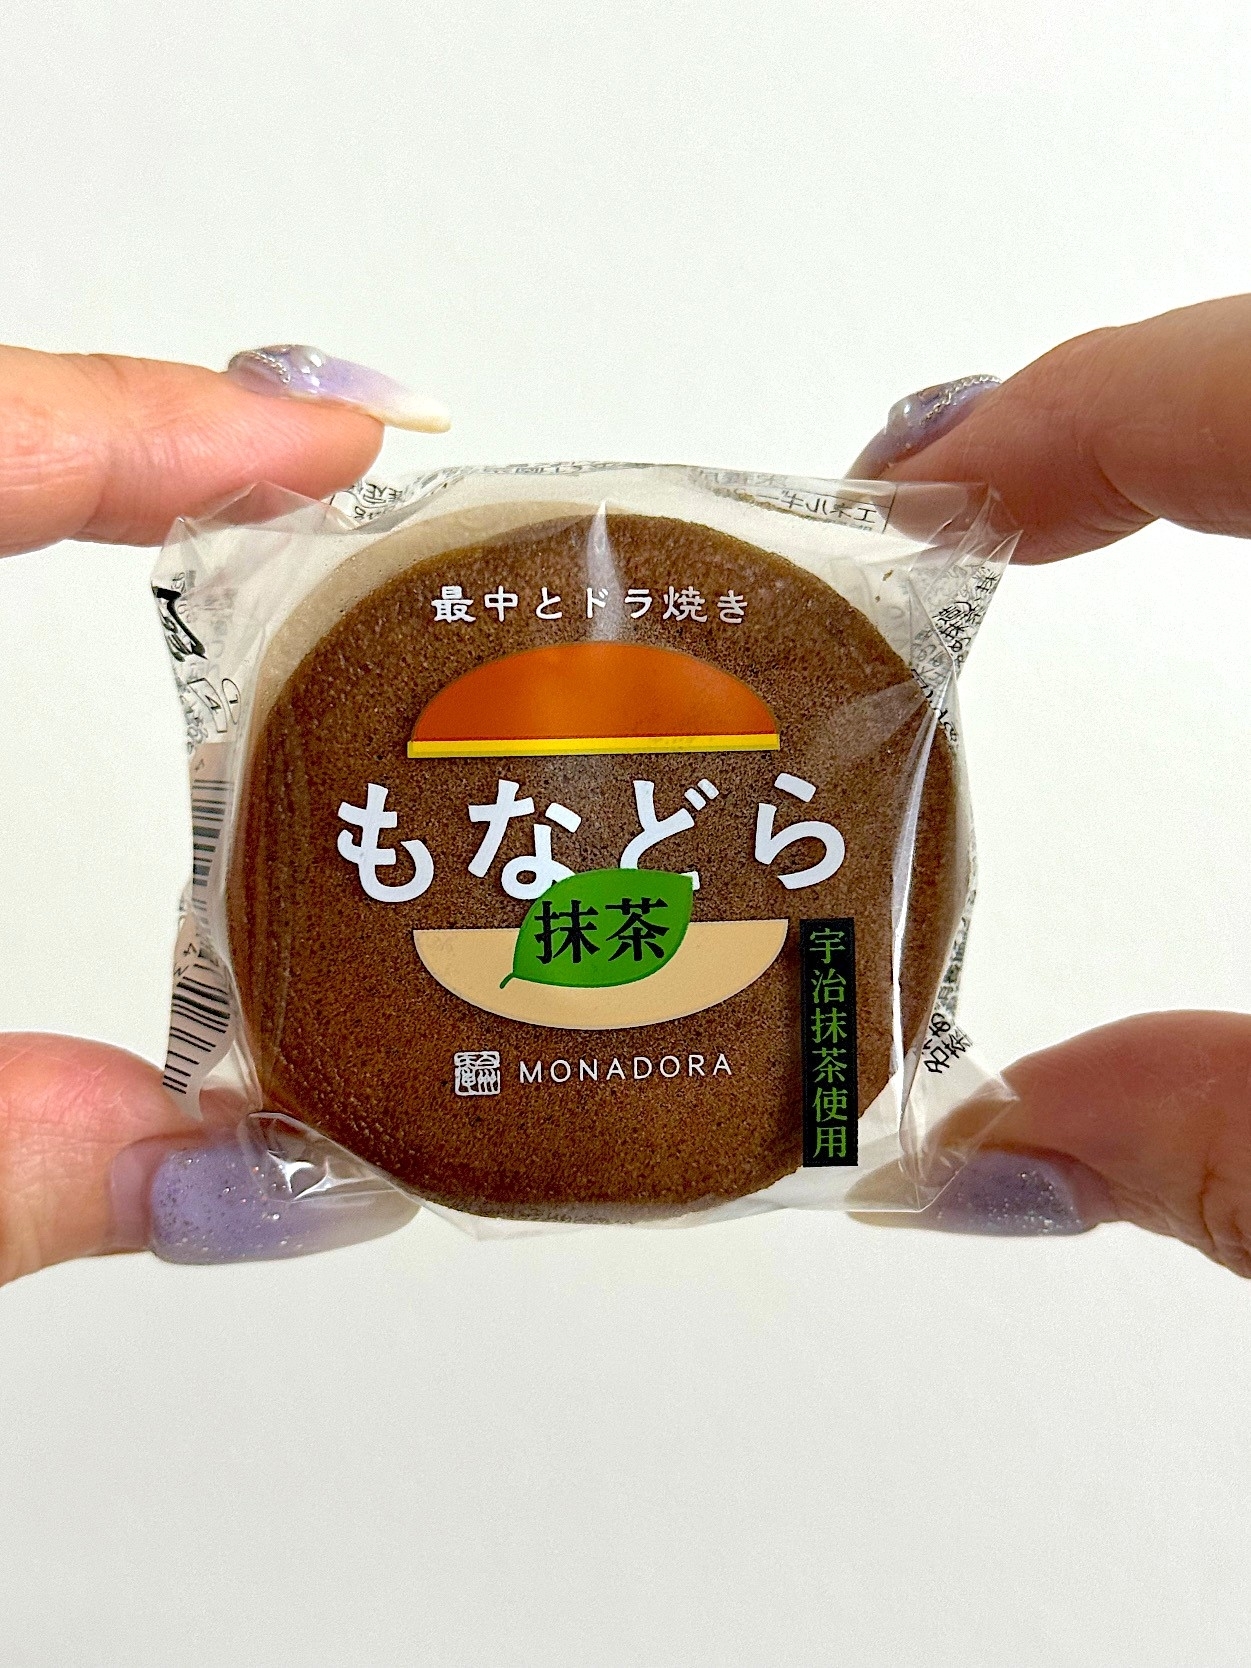 Hand holding a packaged Japanese Monaka wafer snack with visible text and branding